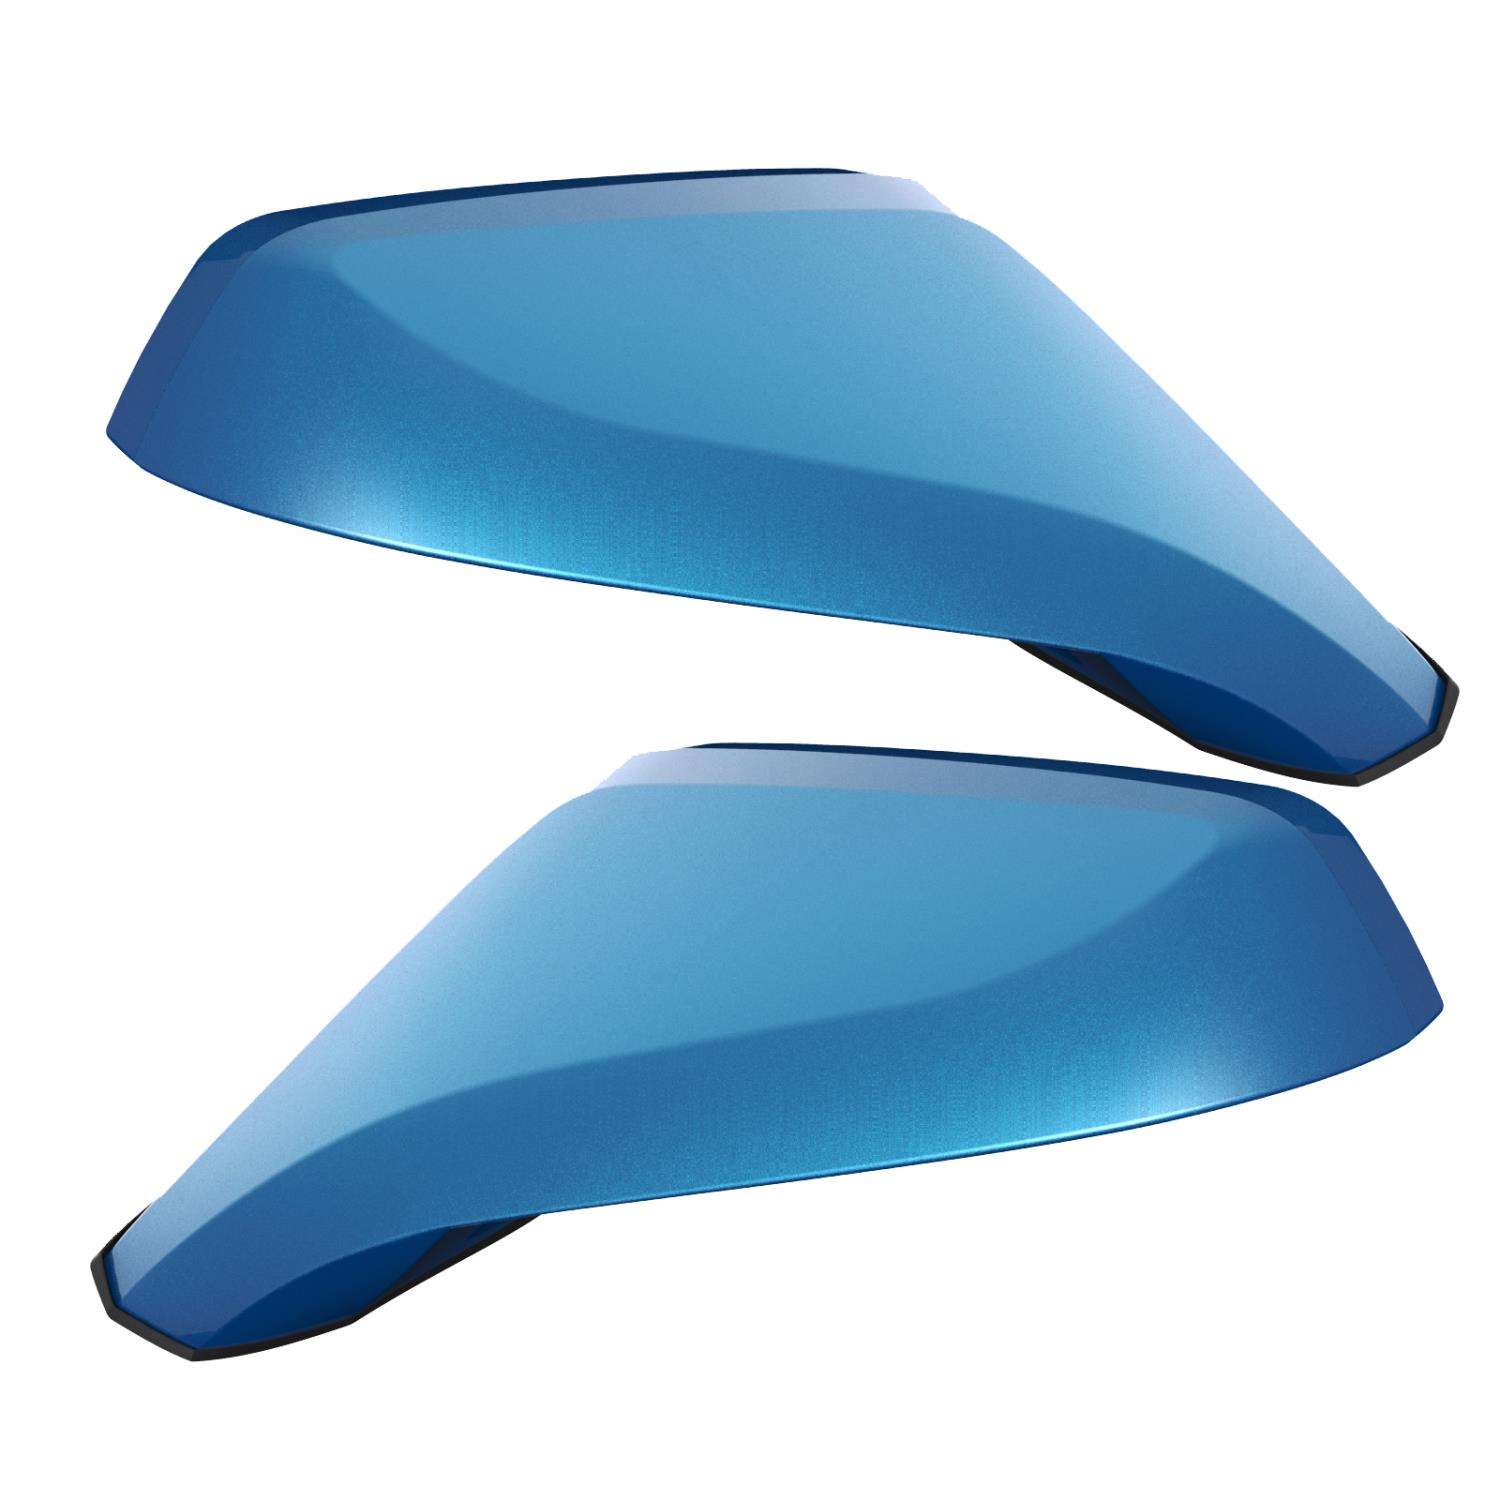 Chevy Camaro Concept Side Mirrors Aqua Blue Metallic GBD Ghosted Dual Intensity